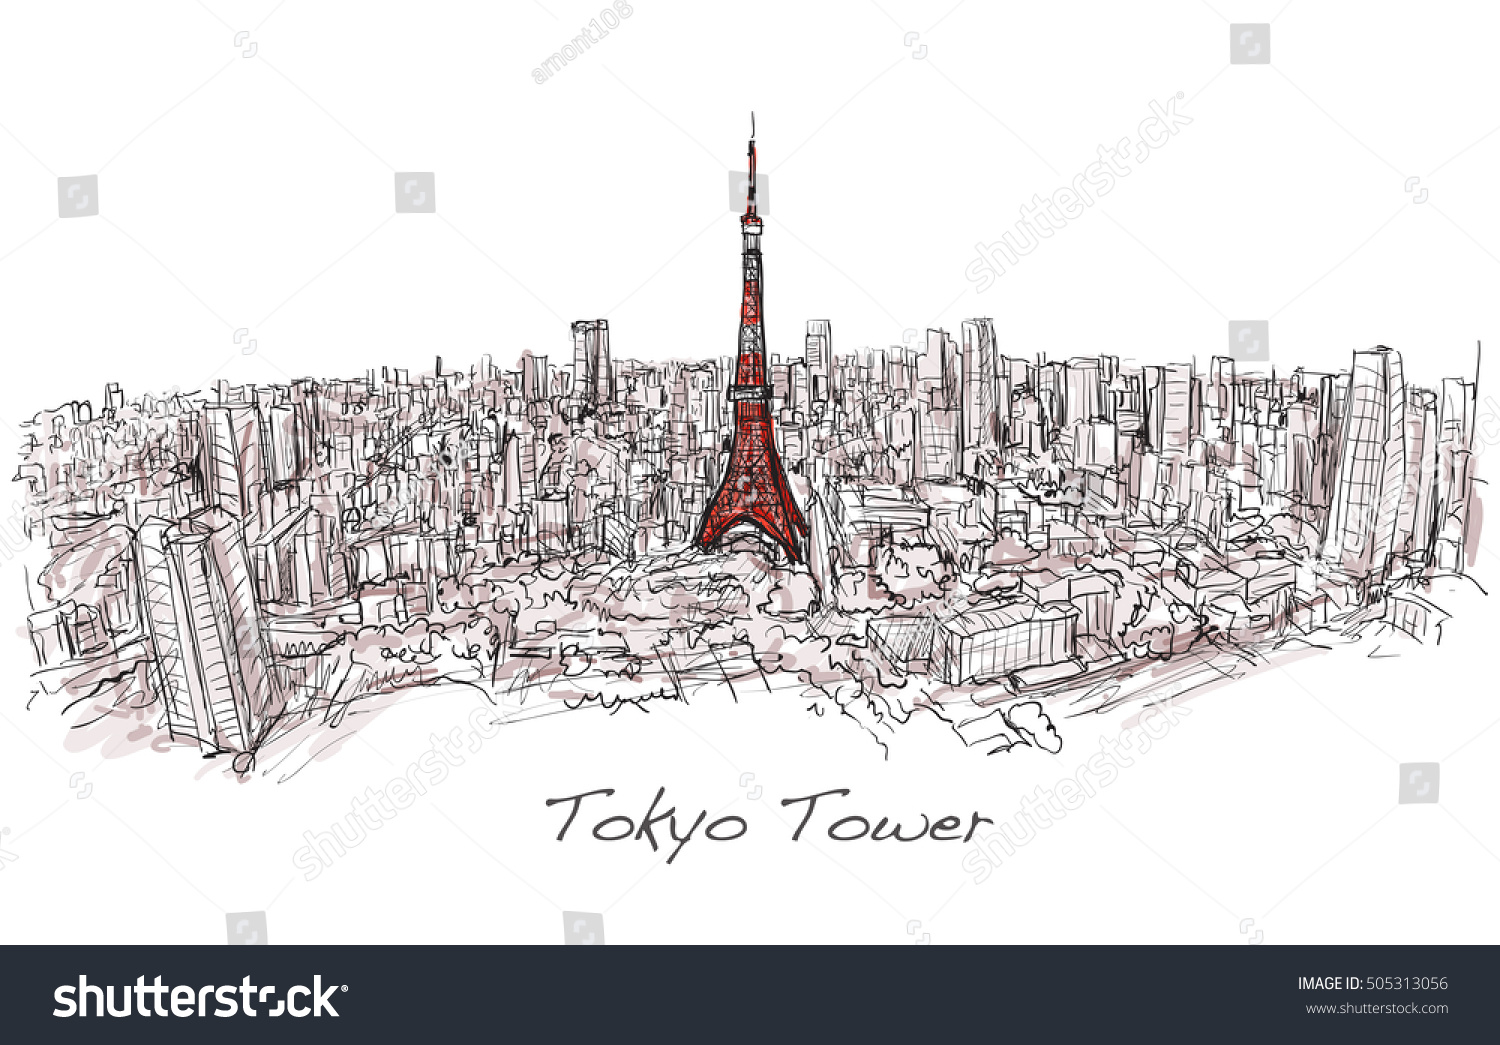 Sketch City Scape Tokyo Tower Building Stock Vector (Royalty Free 